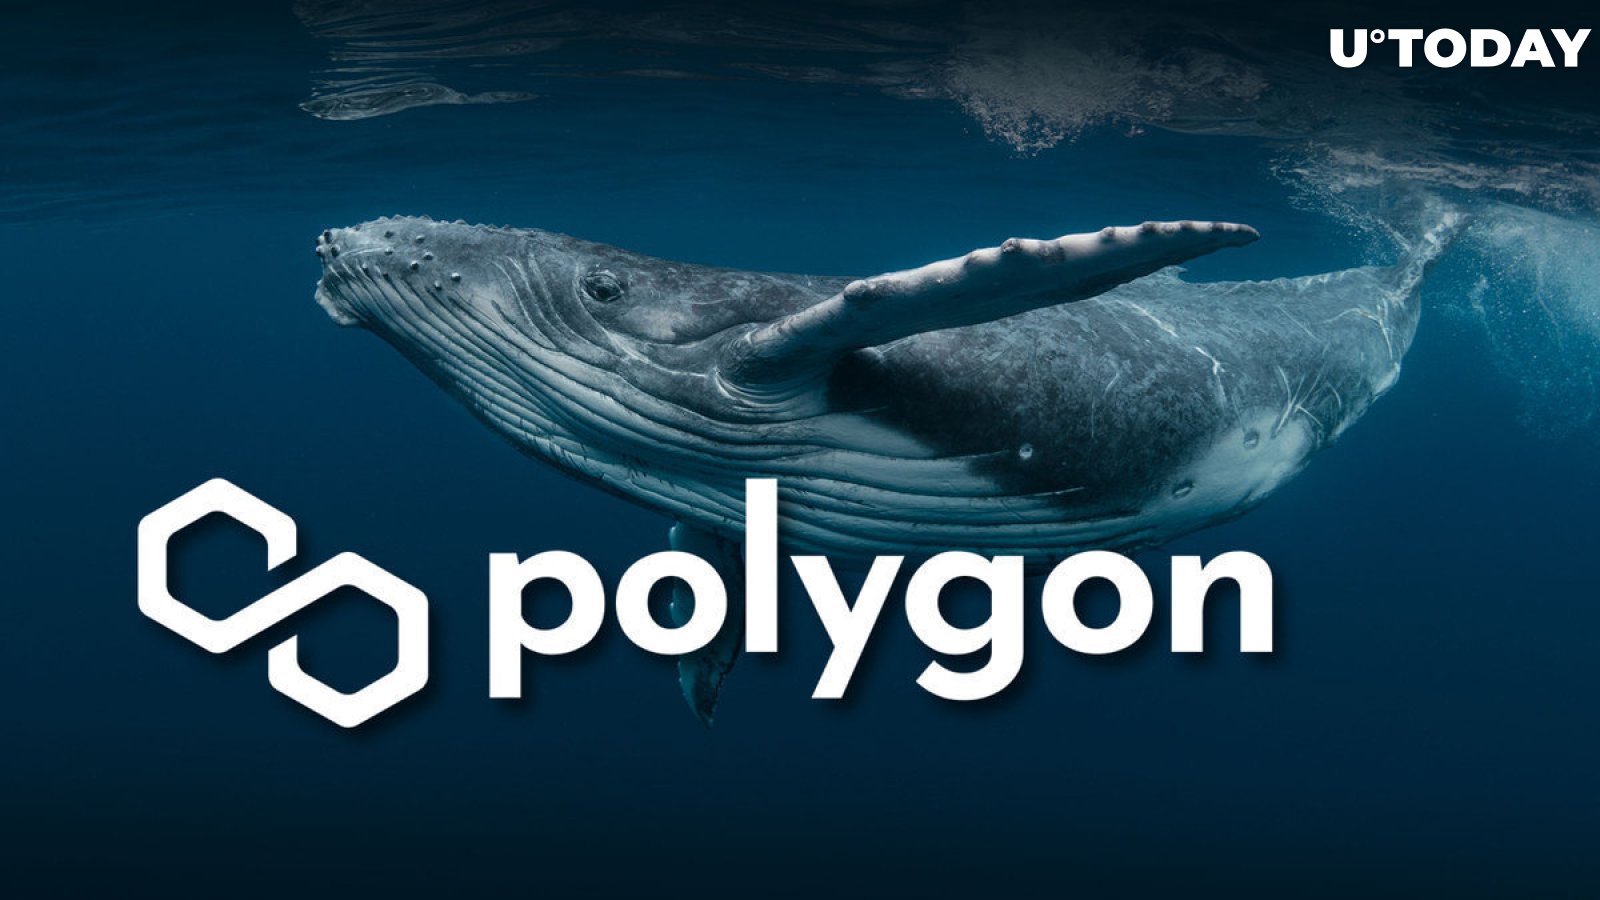 Polygon (MATIC) Skyrockets 743% in Whale Activity Amid Ethereum ETF Buzz